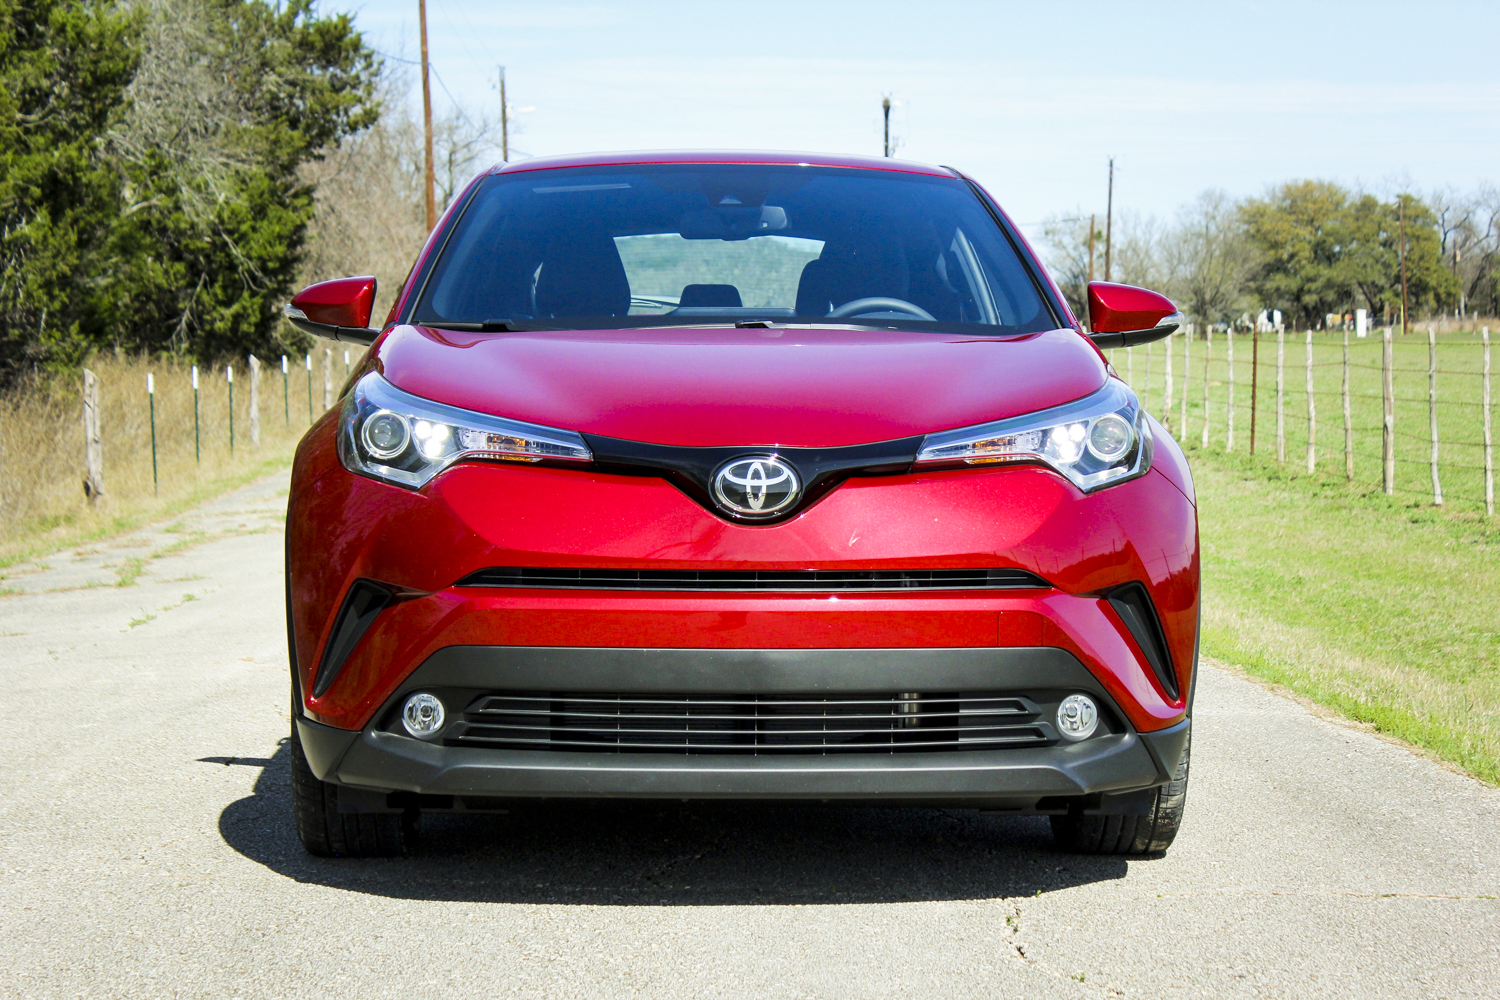 2018 toyota c hr first drive review firstdrive 000146 1